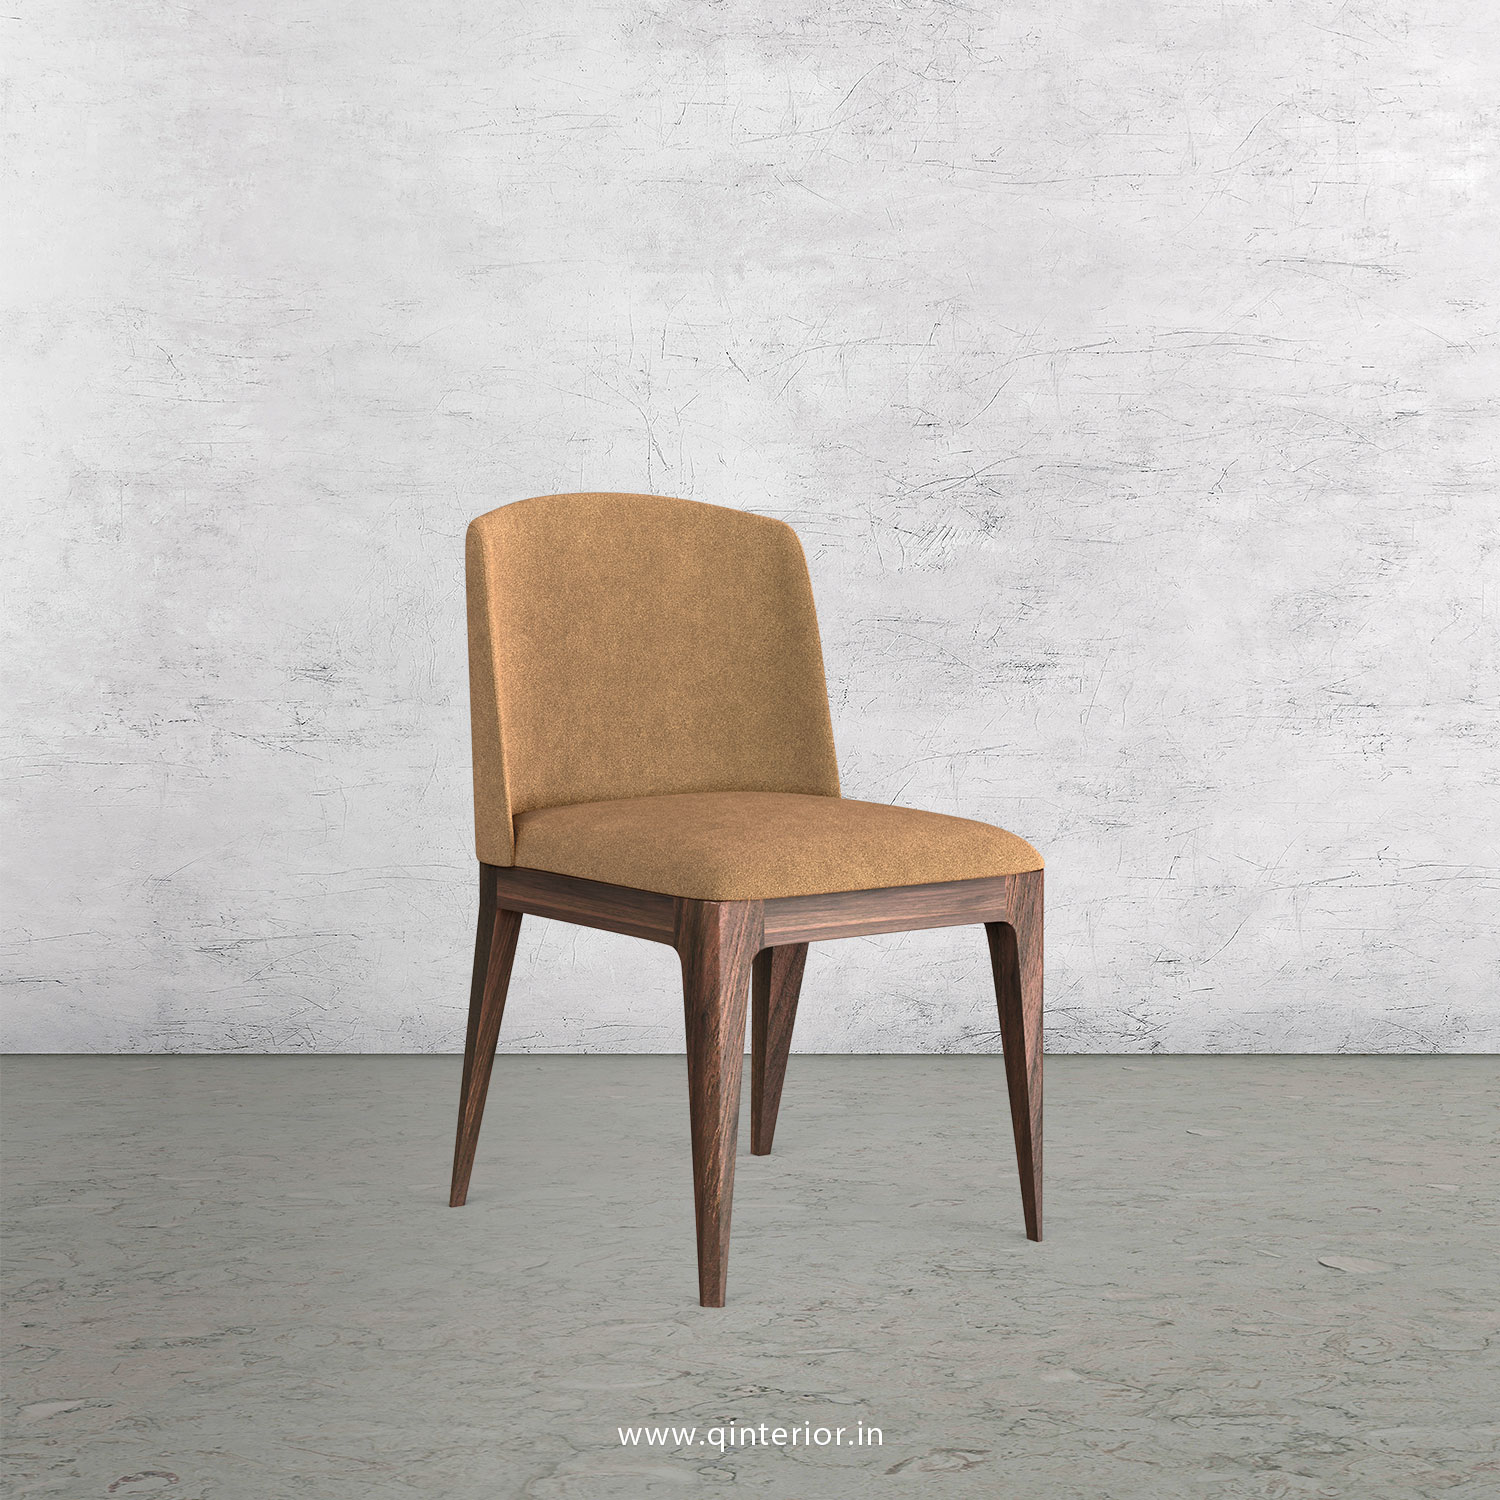 Cario Dining Chair in Velvet Fabric - DCH001 VL11